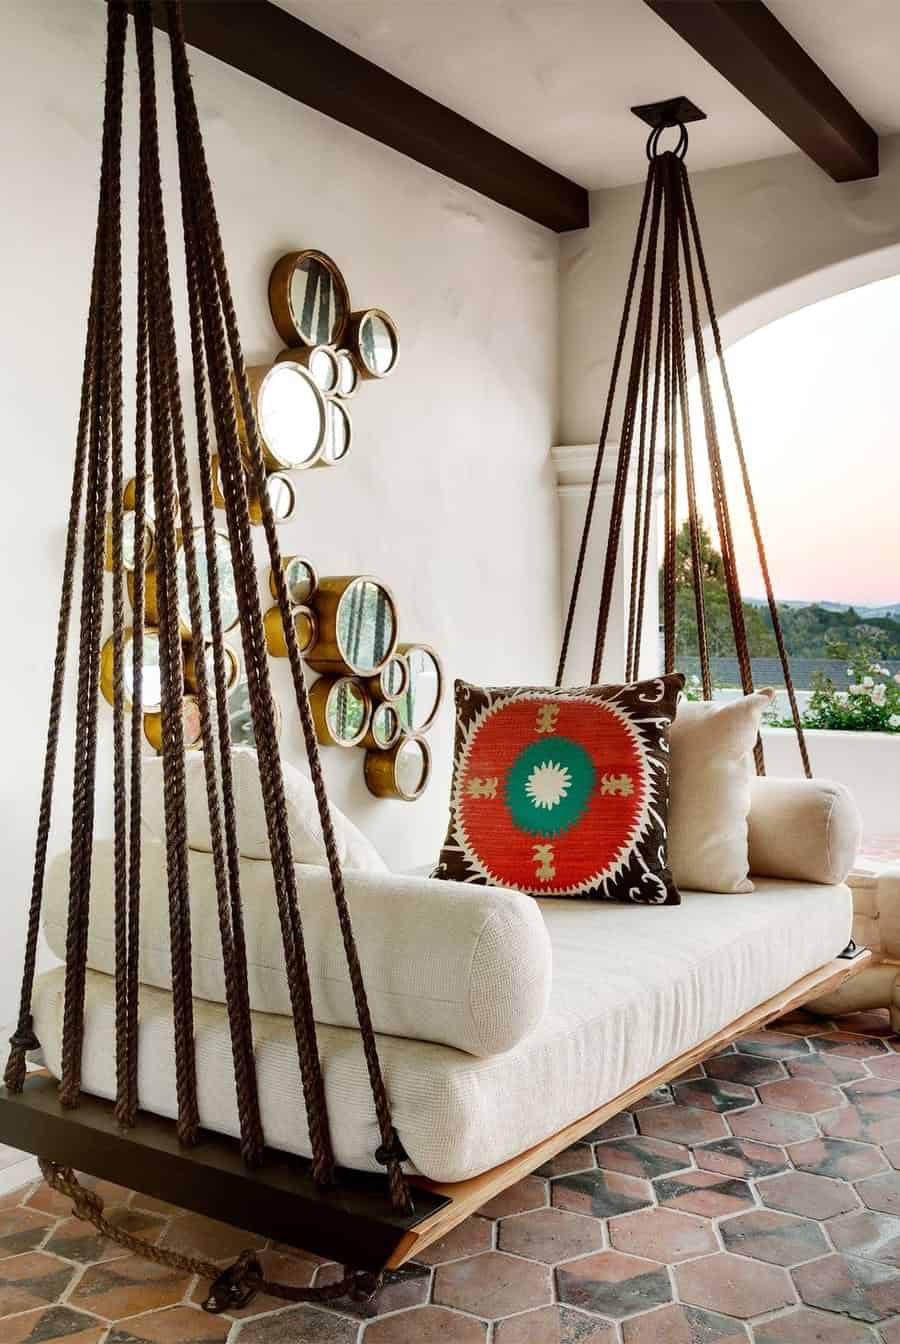 Big white swing seathing with mirror wall decoration ideas